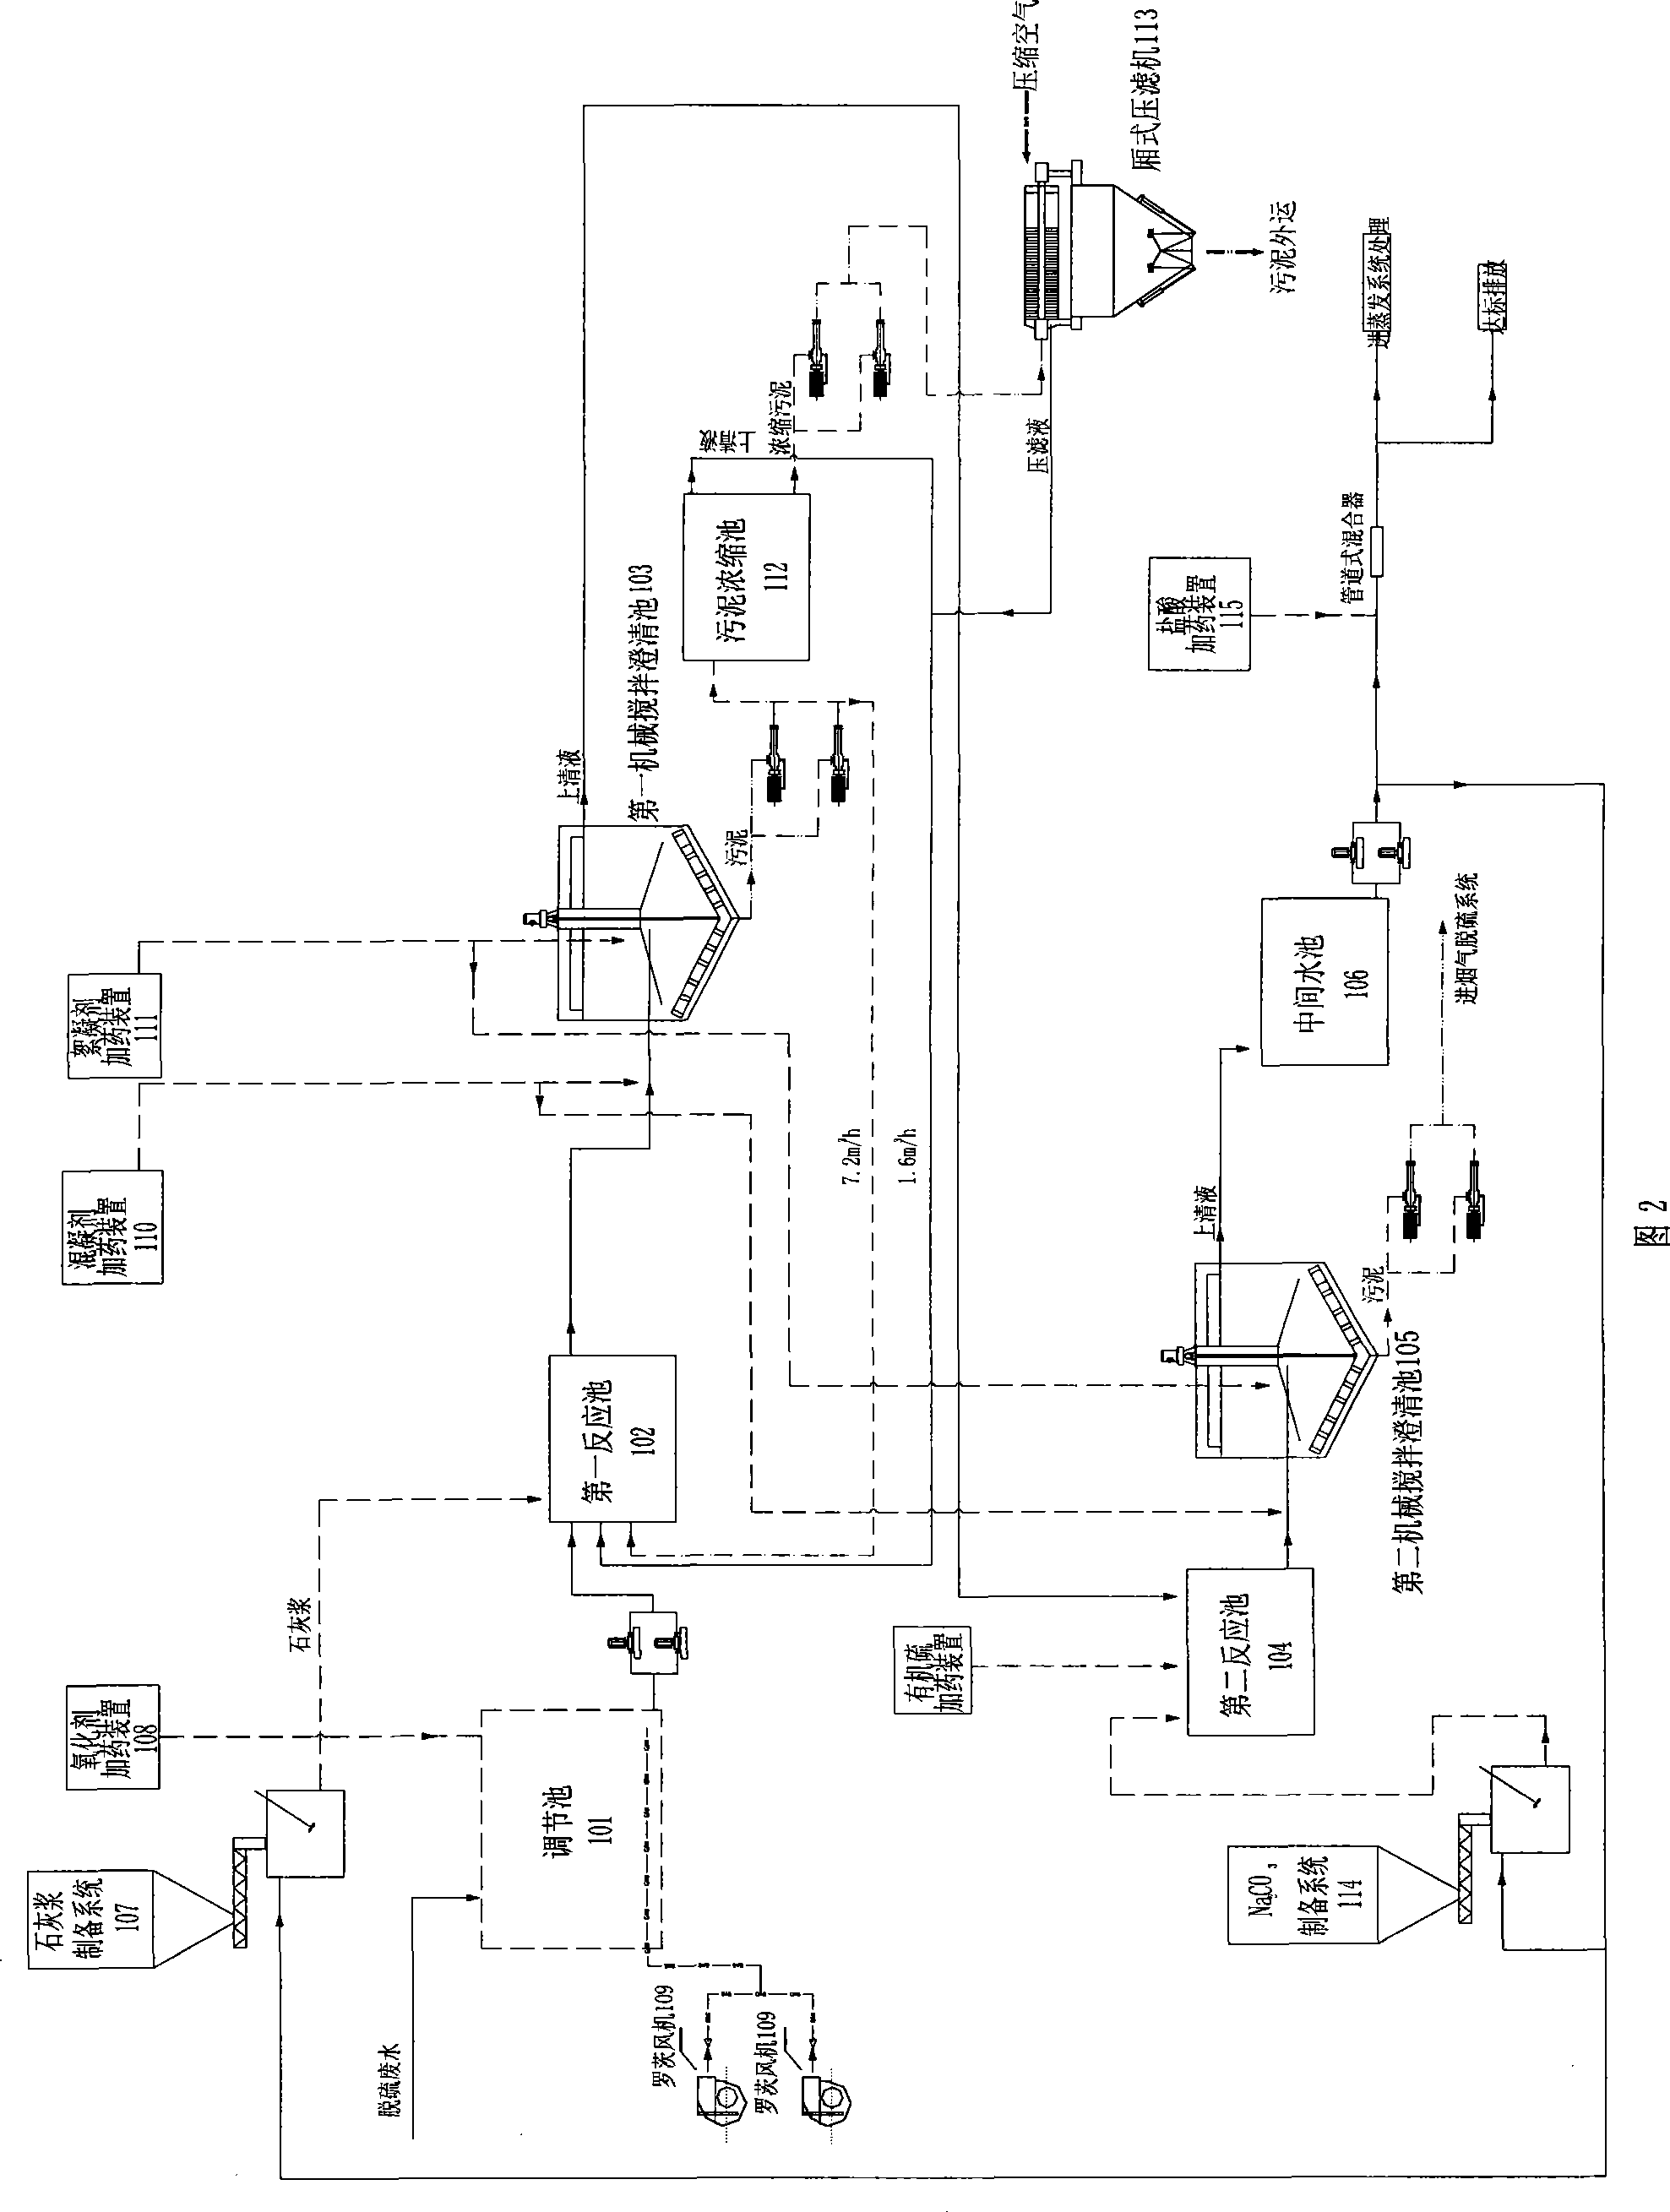 Process and system for treating electric power plant waste water